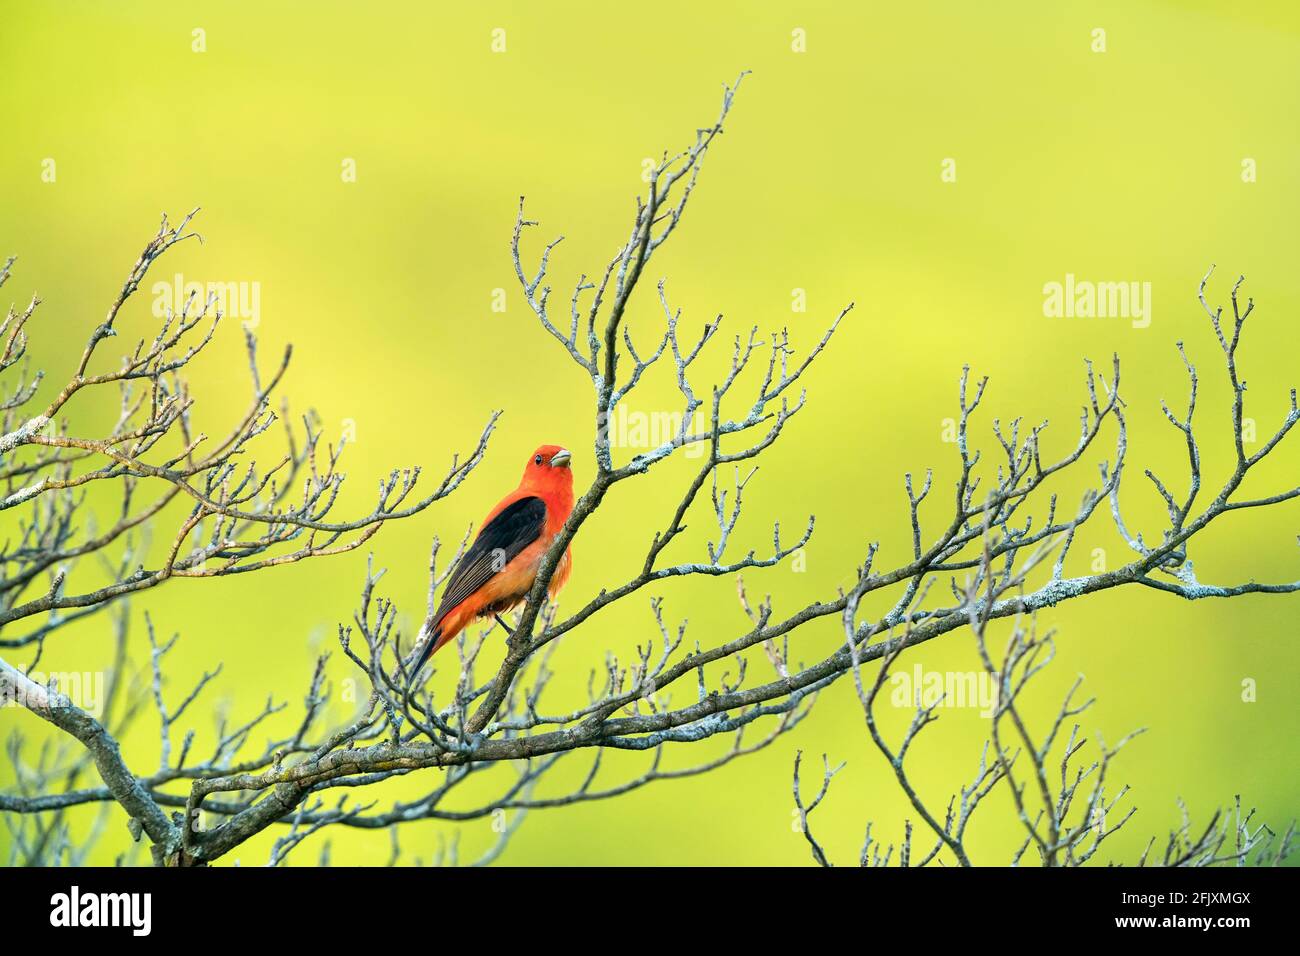 Adult male Scarlet Tanager perched on a branch New Jersey, USA Stock Photo